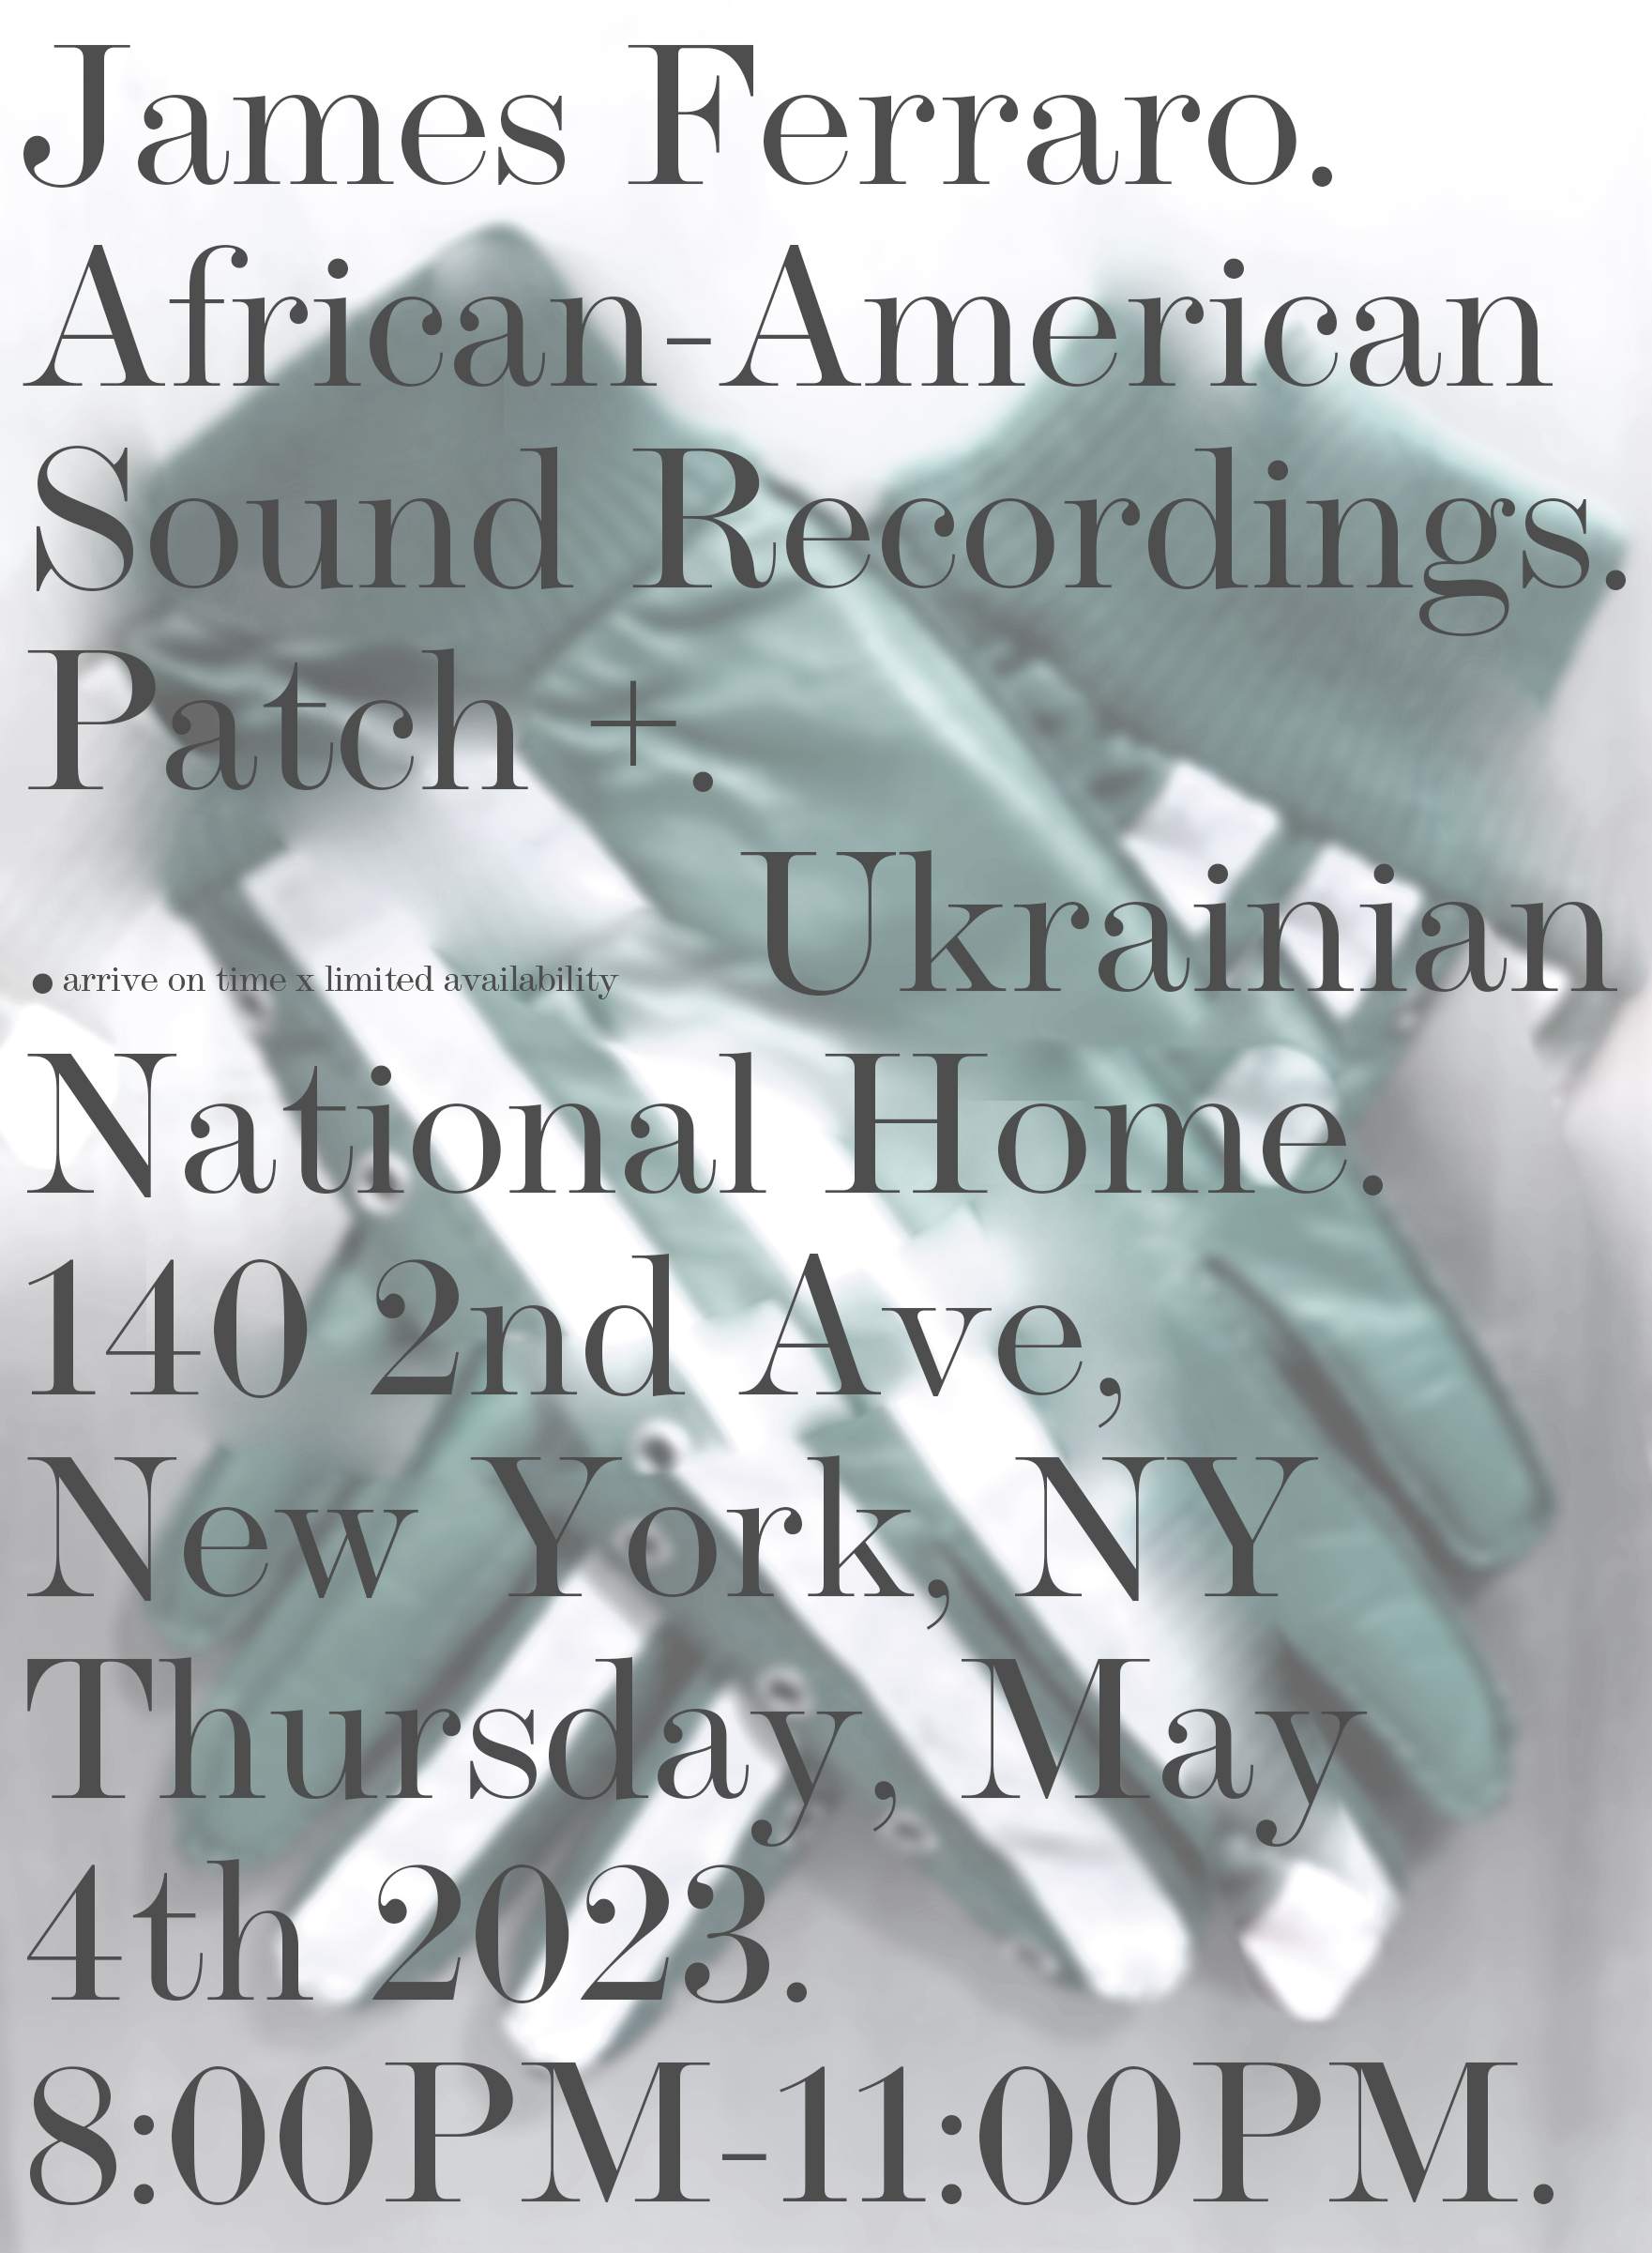 Free Advice presents: James Ferraro with African-American Sound Recordings & Patch - フライヤー表